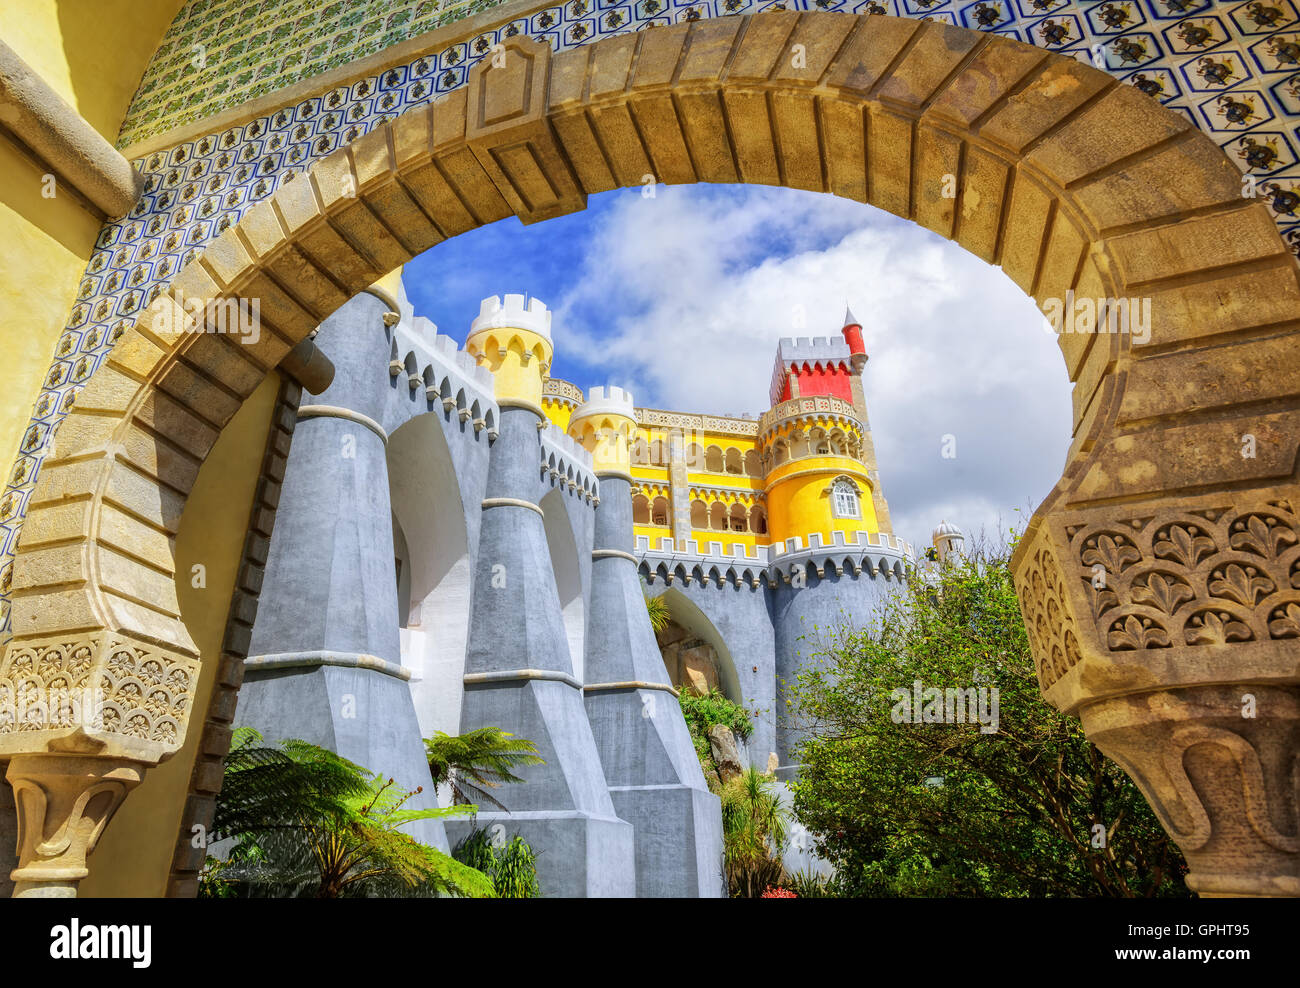 Pena palace, Sintra, Portugal, view through the entrance arch Stock Photo